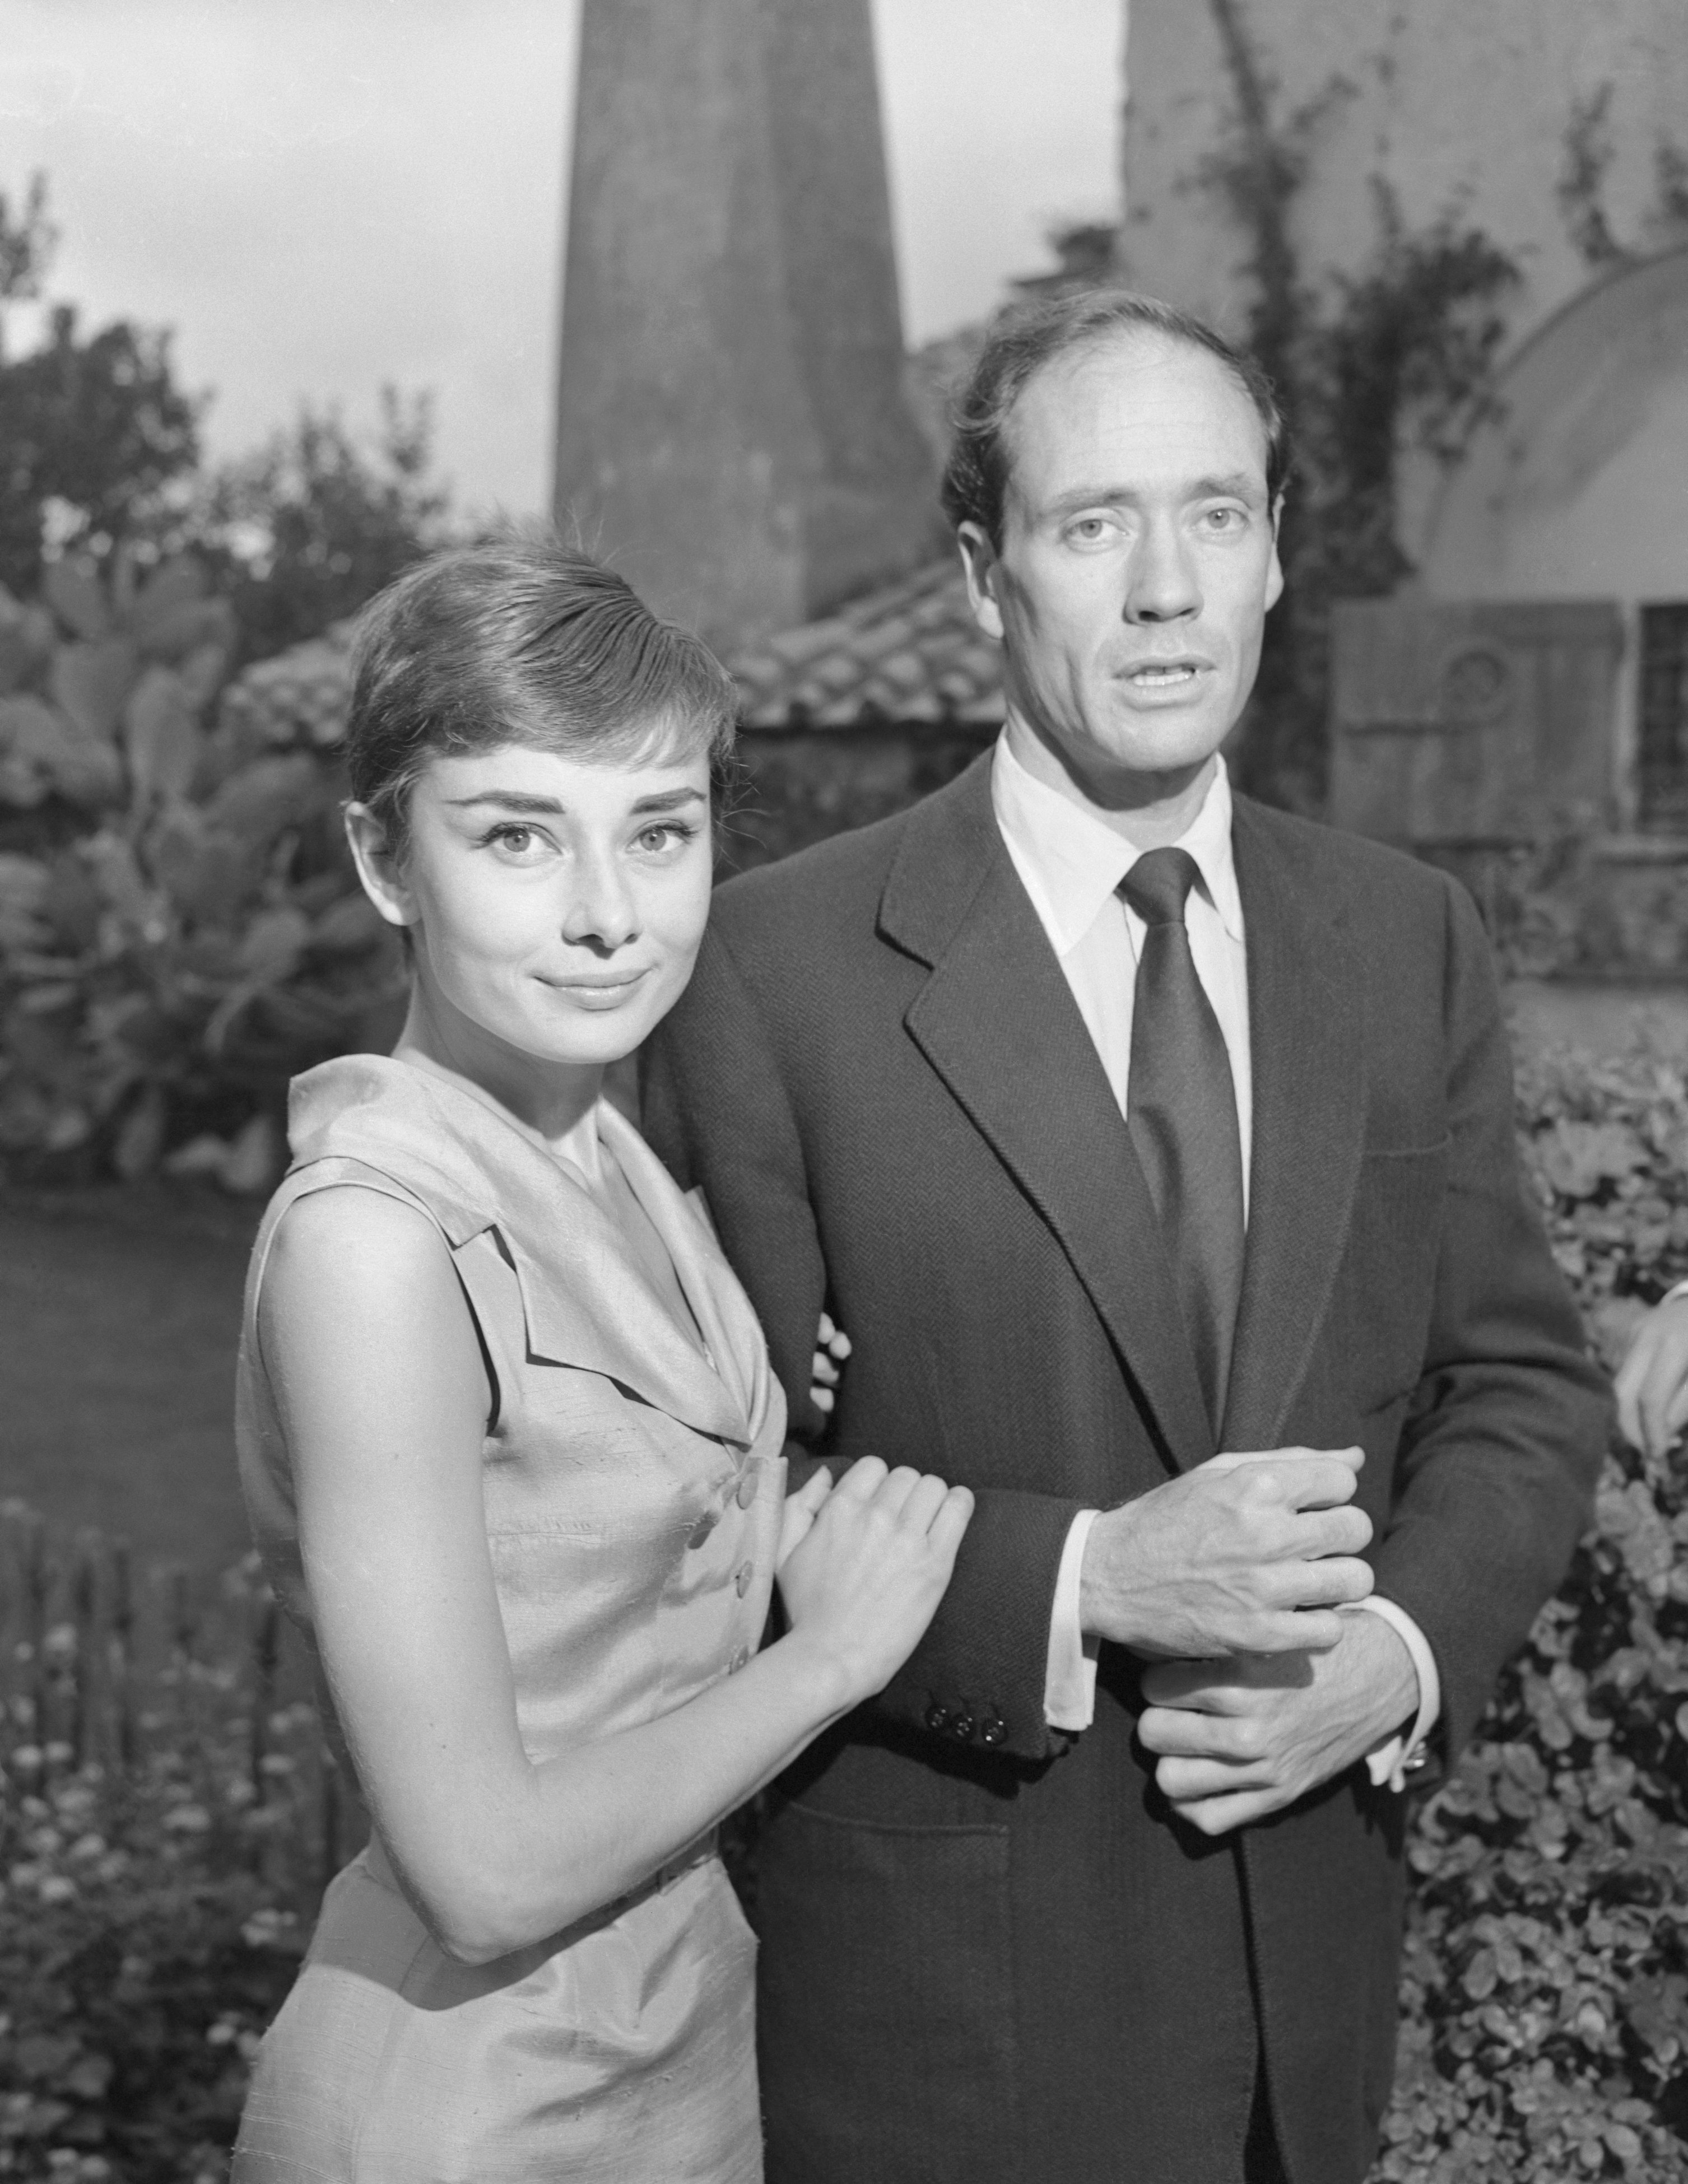 Actress Audrey Hepburn and her actor husband, Mel Ferrer, after their secret wedding in 1954 | Source: Getty Images